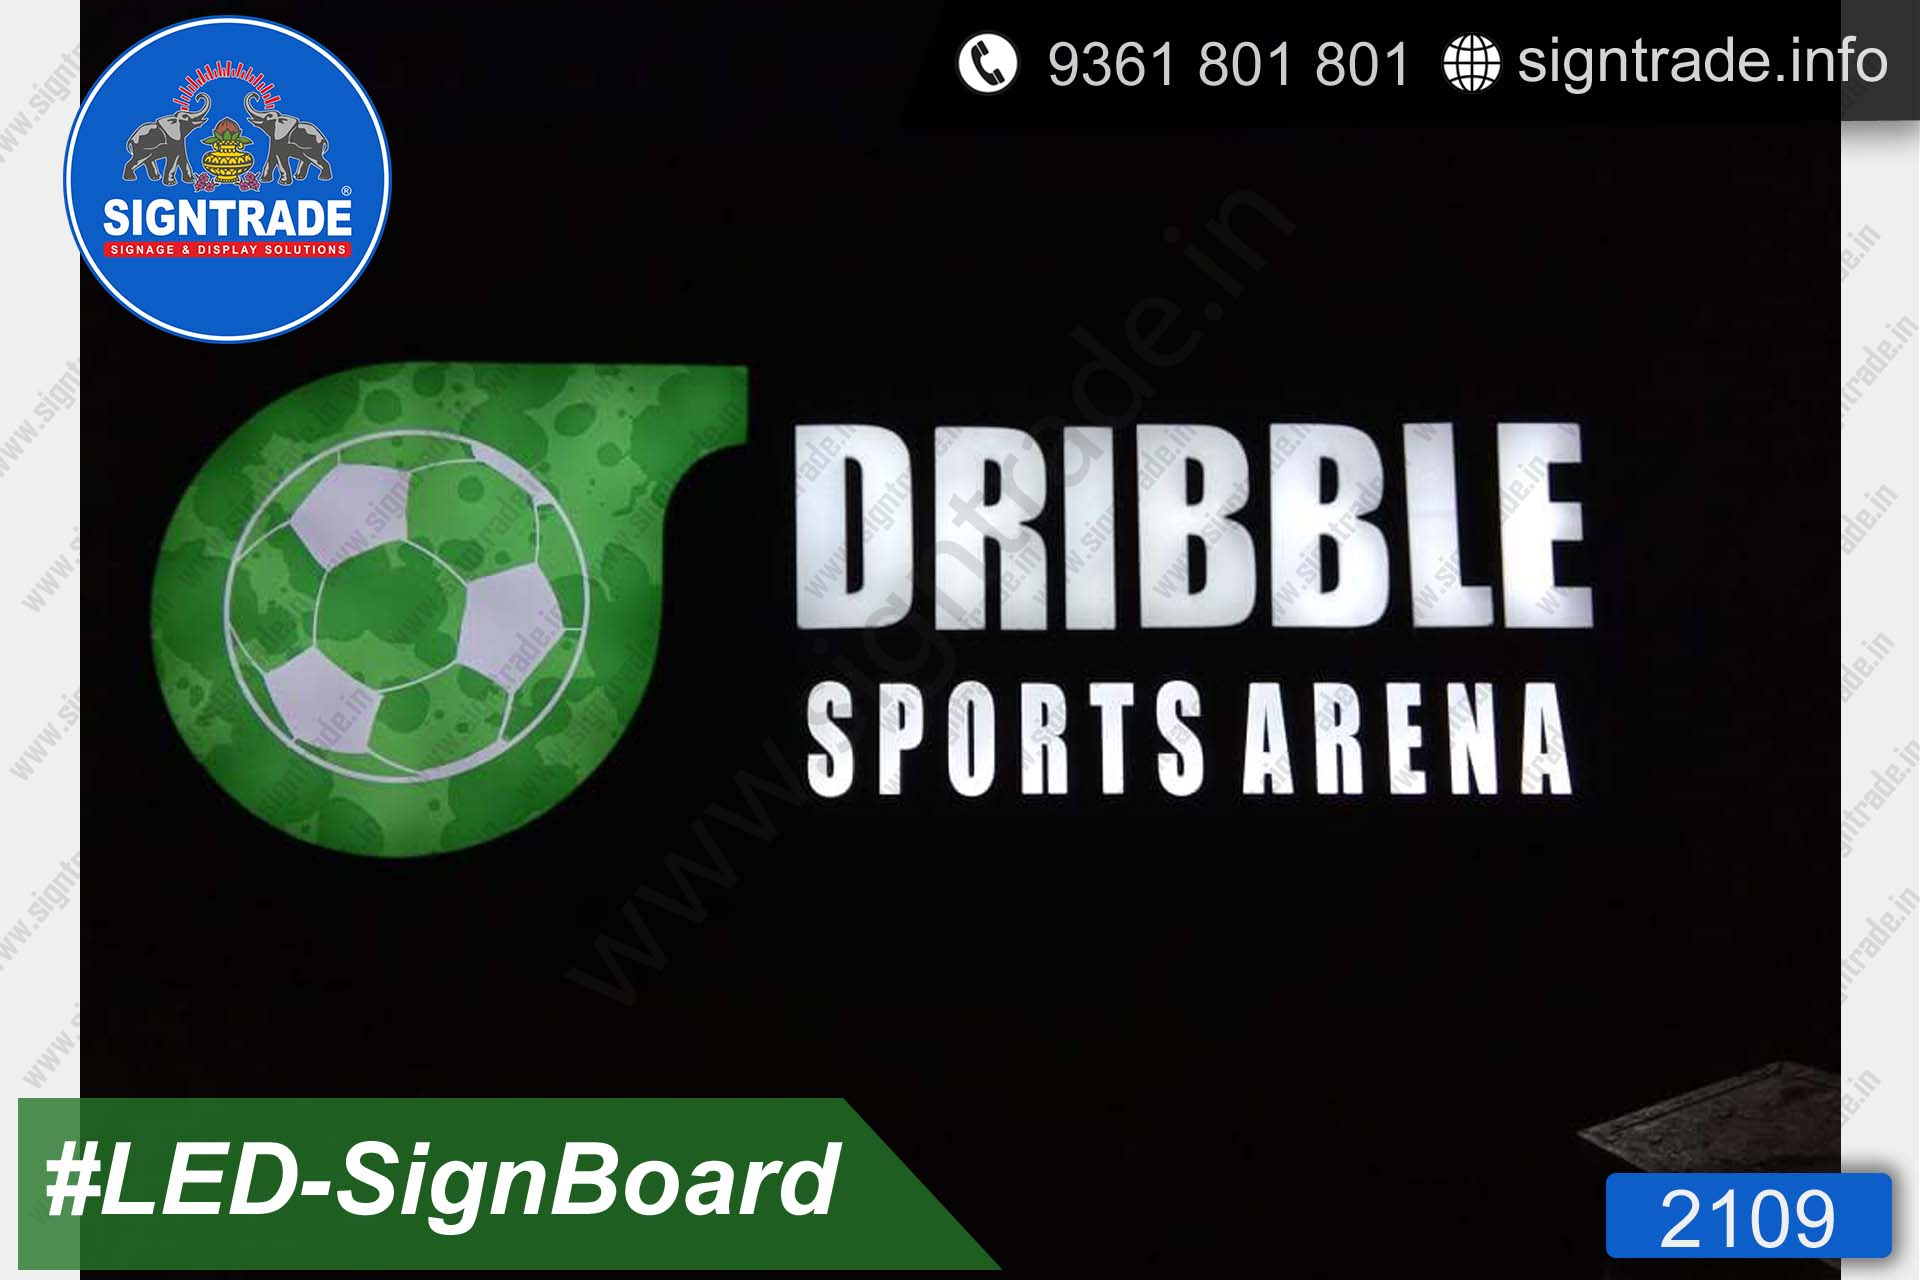 Dribble sports arena sign board